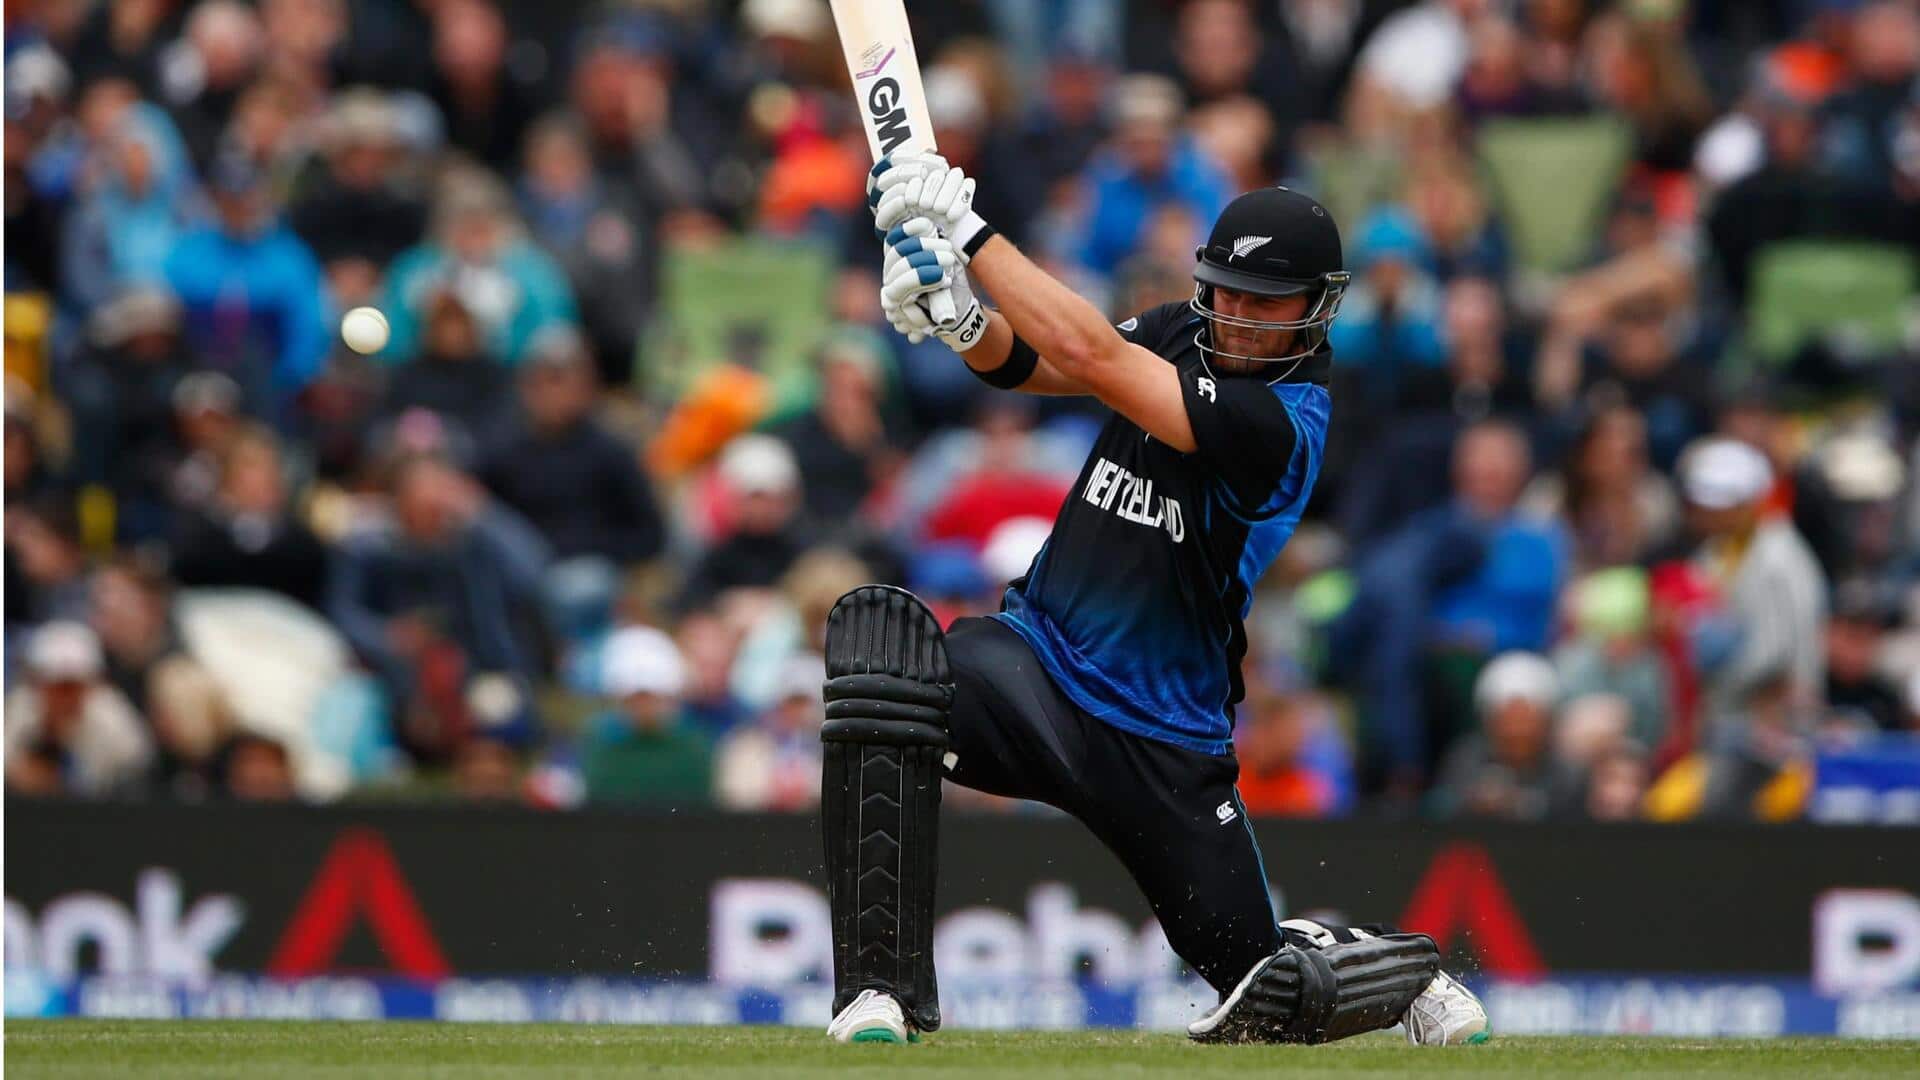 Decoding profile of former NZ, current USA all-rounder Corey Anderson